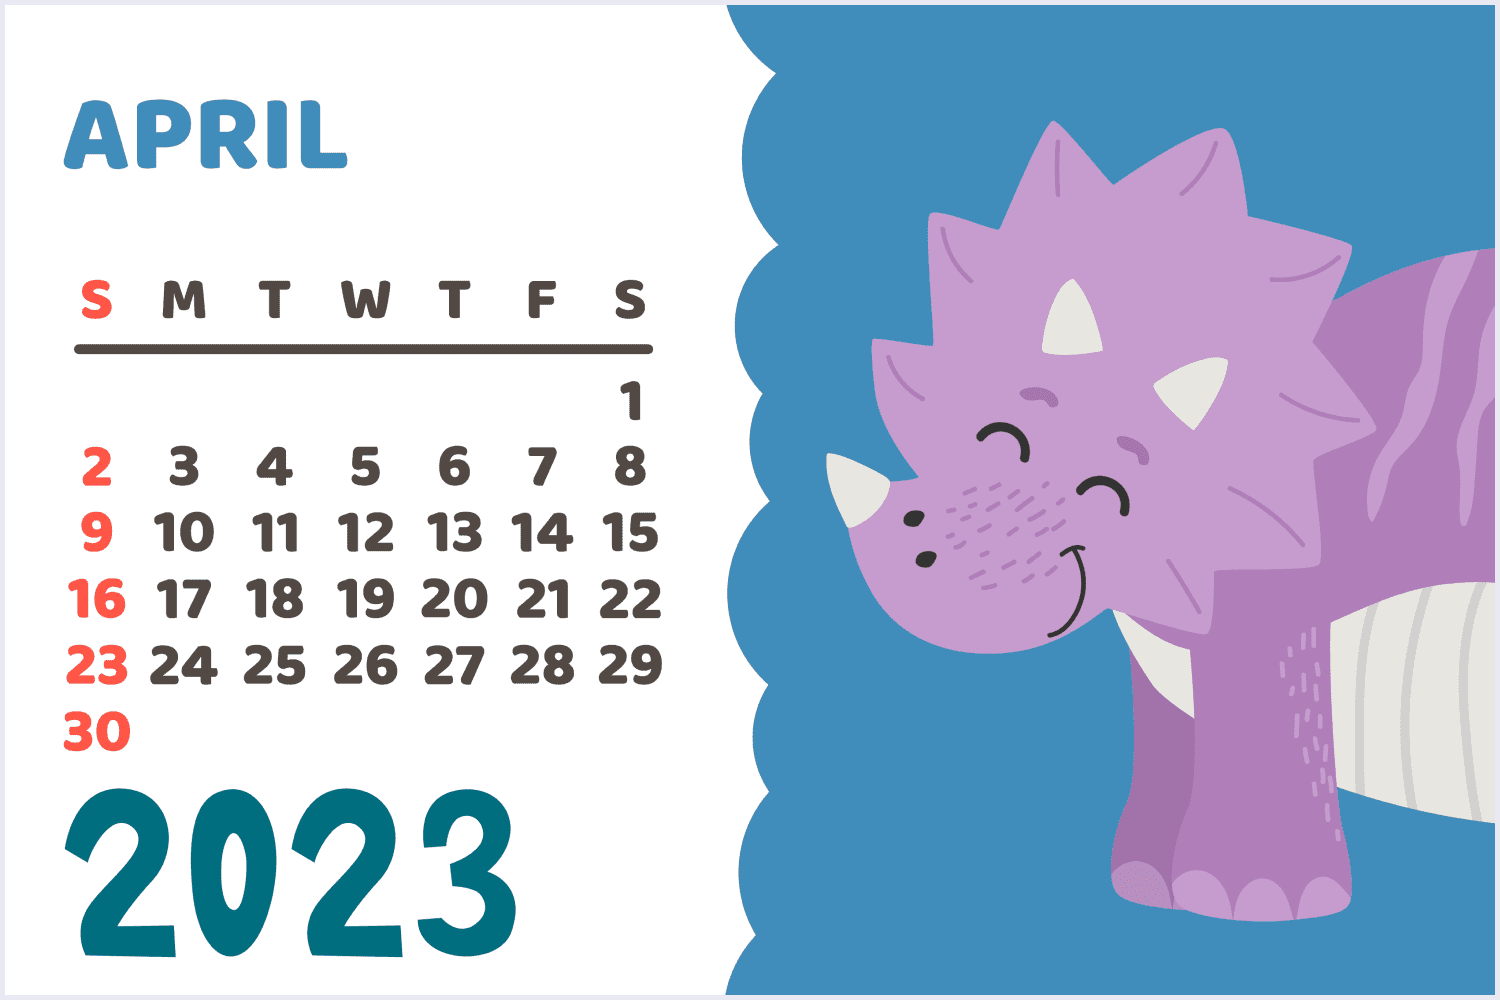 Calendar for April 2023 with a pink dinosaur on a blue background.